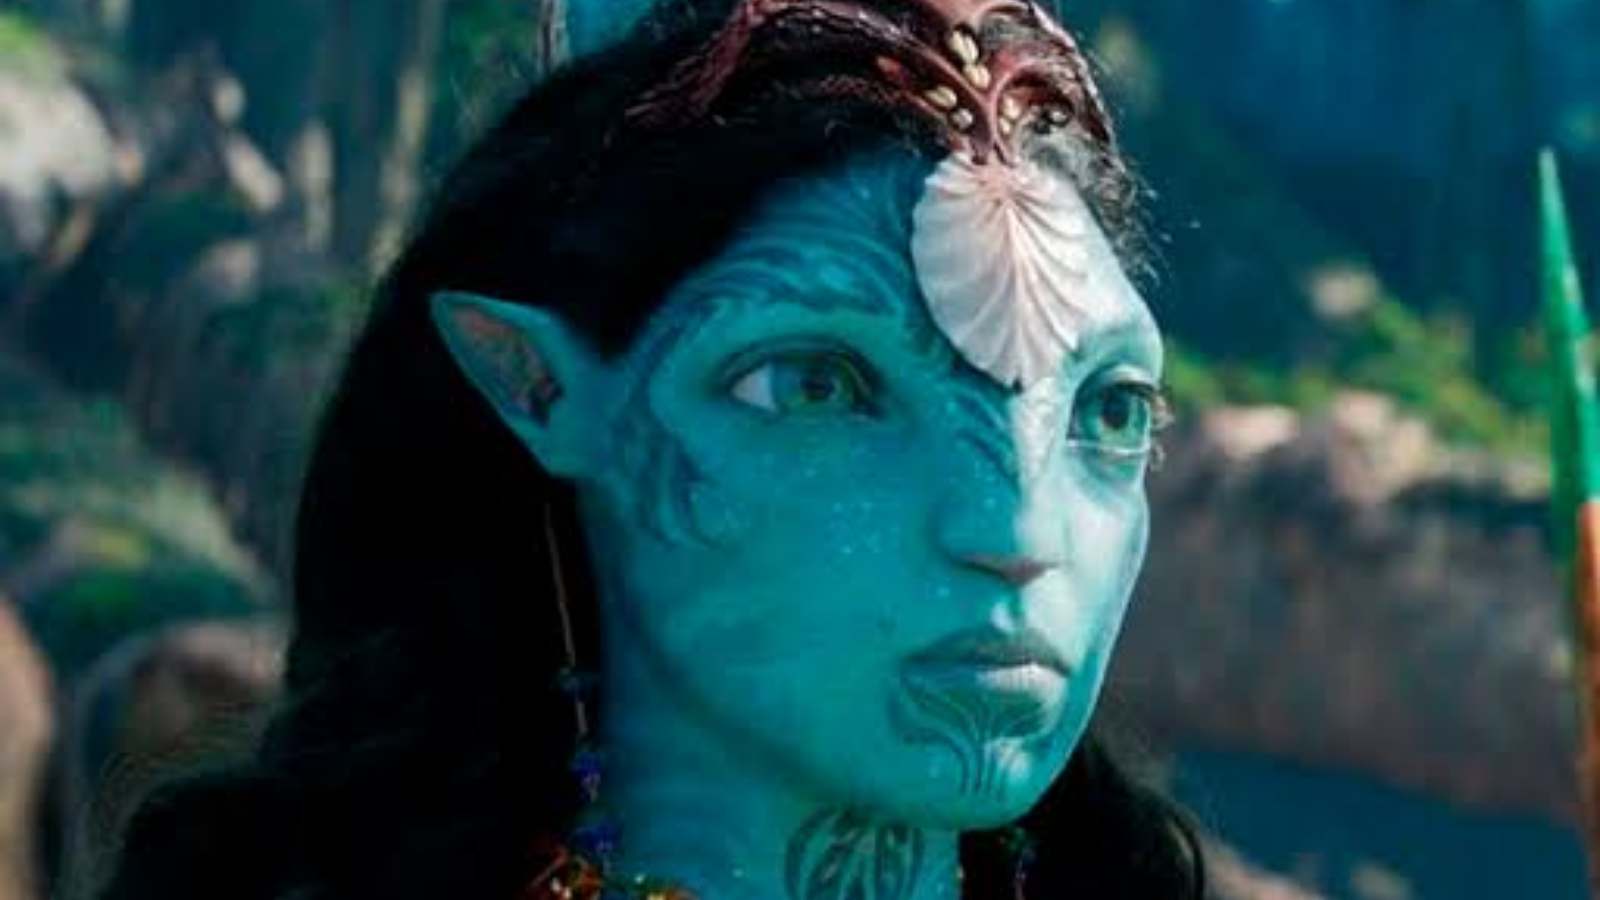 Kate Winslet as Ronal in 'Avatar: The Way of Water'